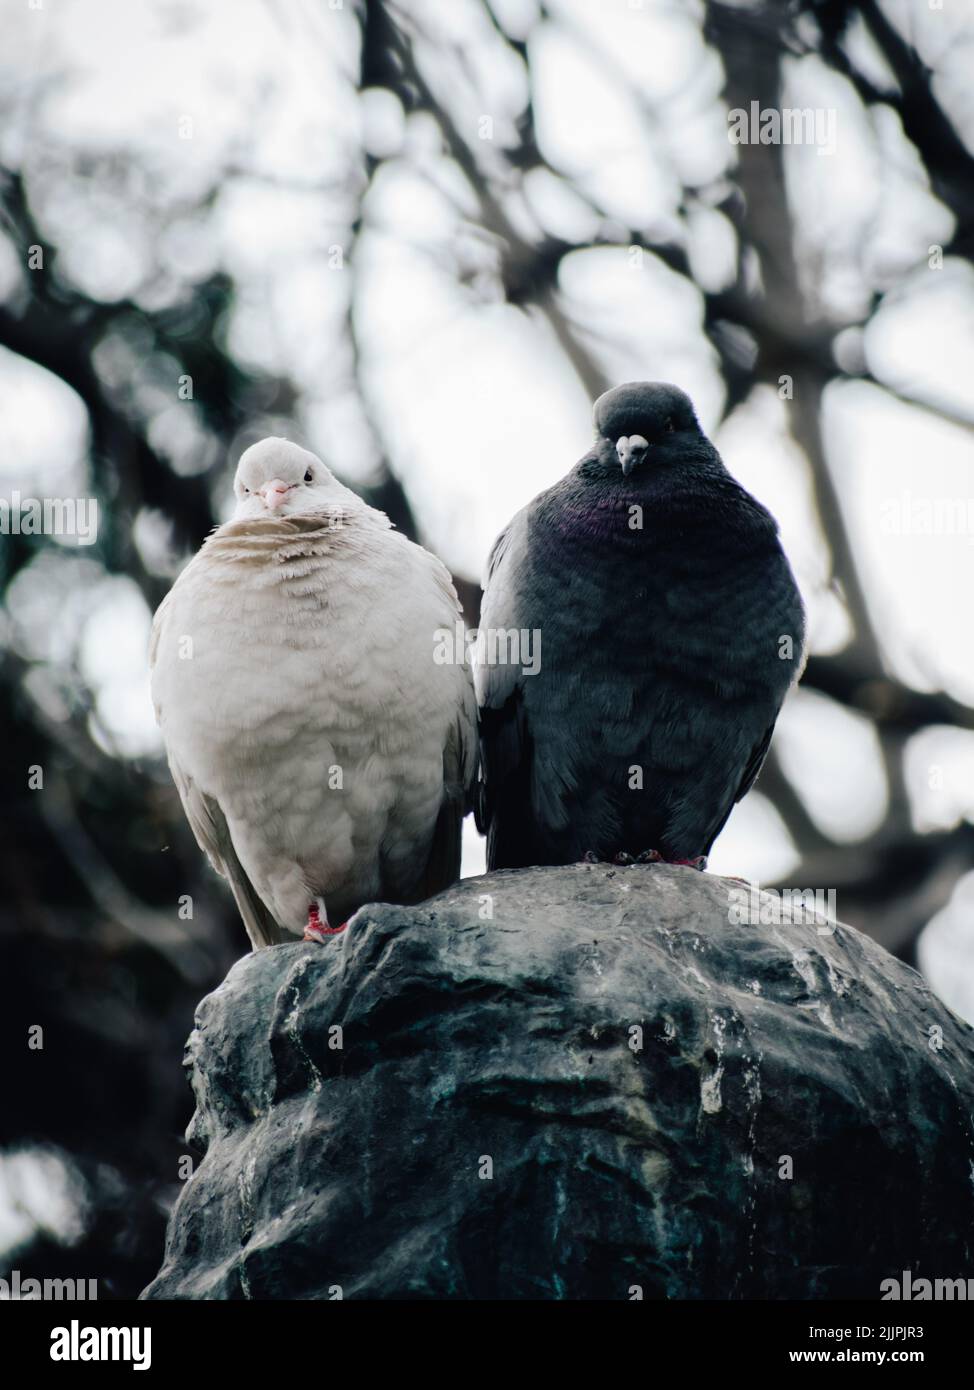 A vertical shot of a couple of black and white pigeons standing on the top of a sculpture Stock Photo